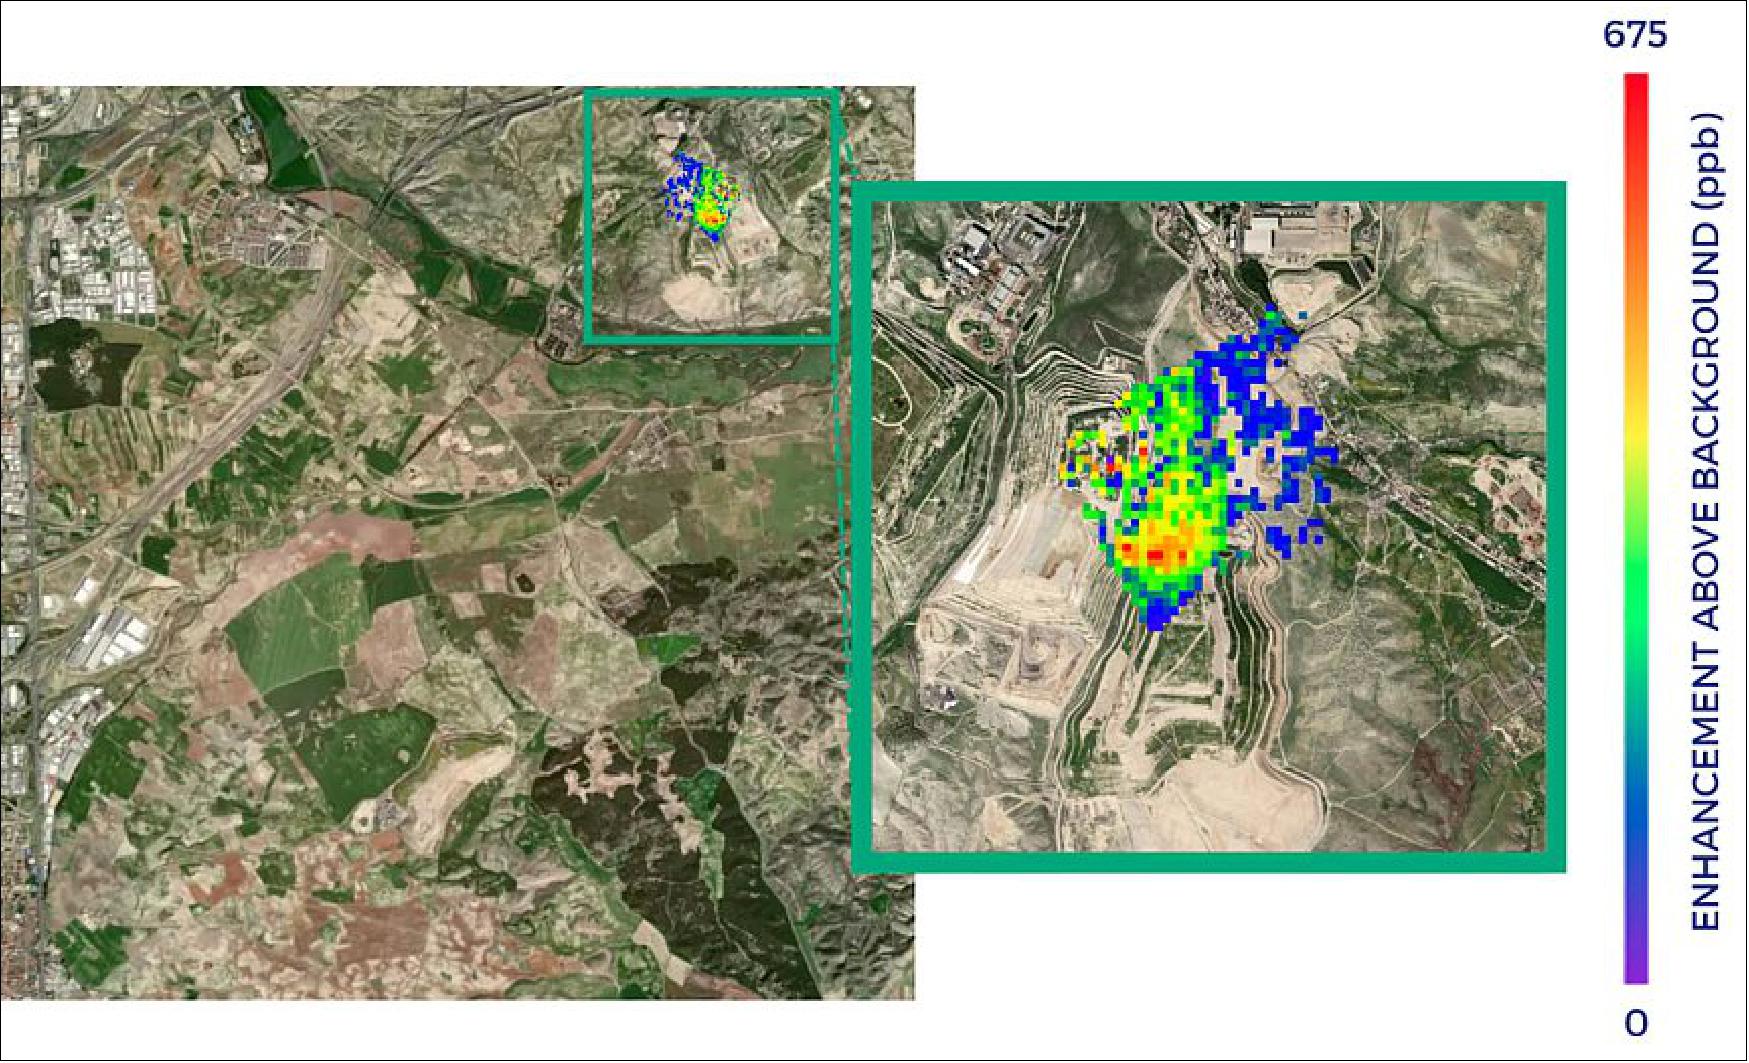 Figure 29: Methane emissions detected from Madrid landfill by by GHGSat. The image shows the methane emissions from one of the landfill sites in Madrid on 20 August 2021 (image credit: GHGSat)